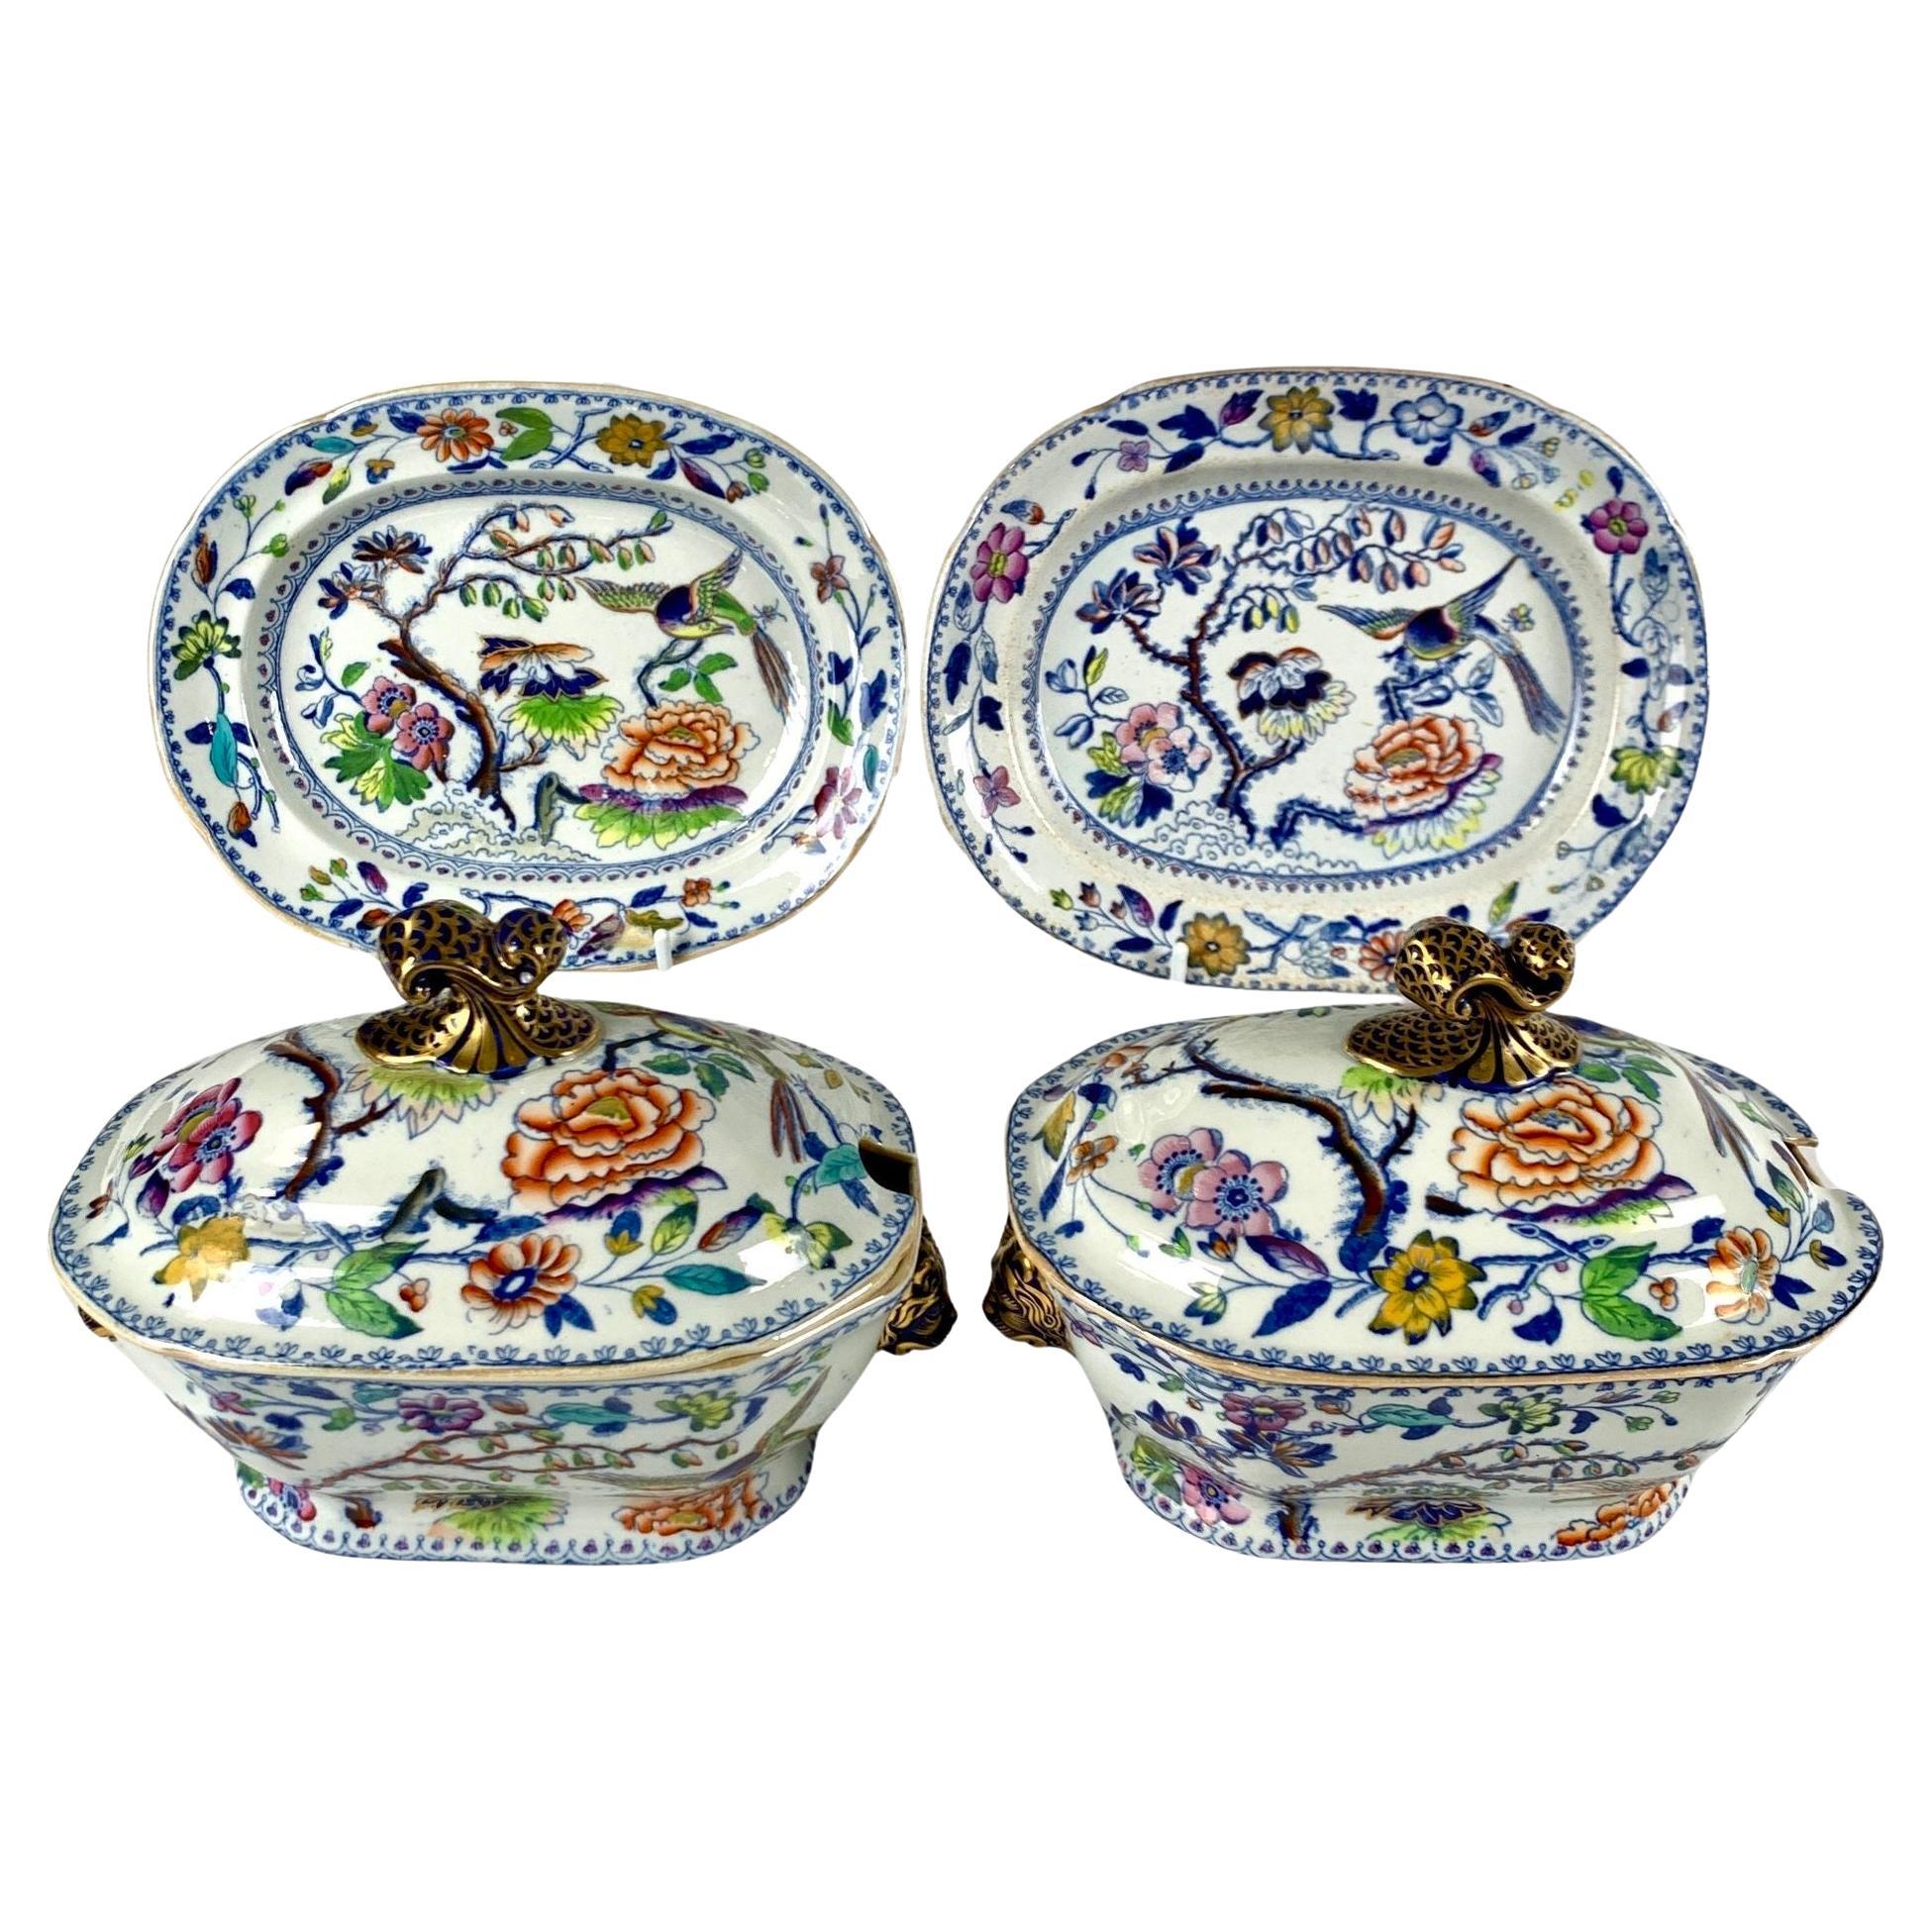 Pair of Sauce Tureens Flying Bird Pattern England Circa 1815 For Sale